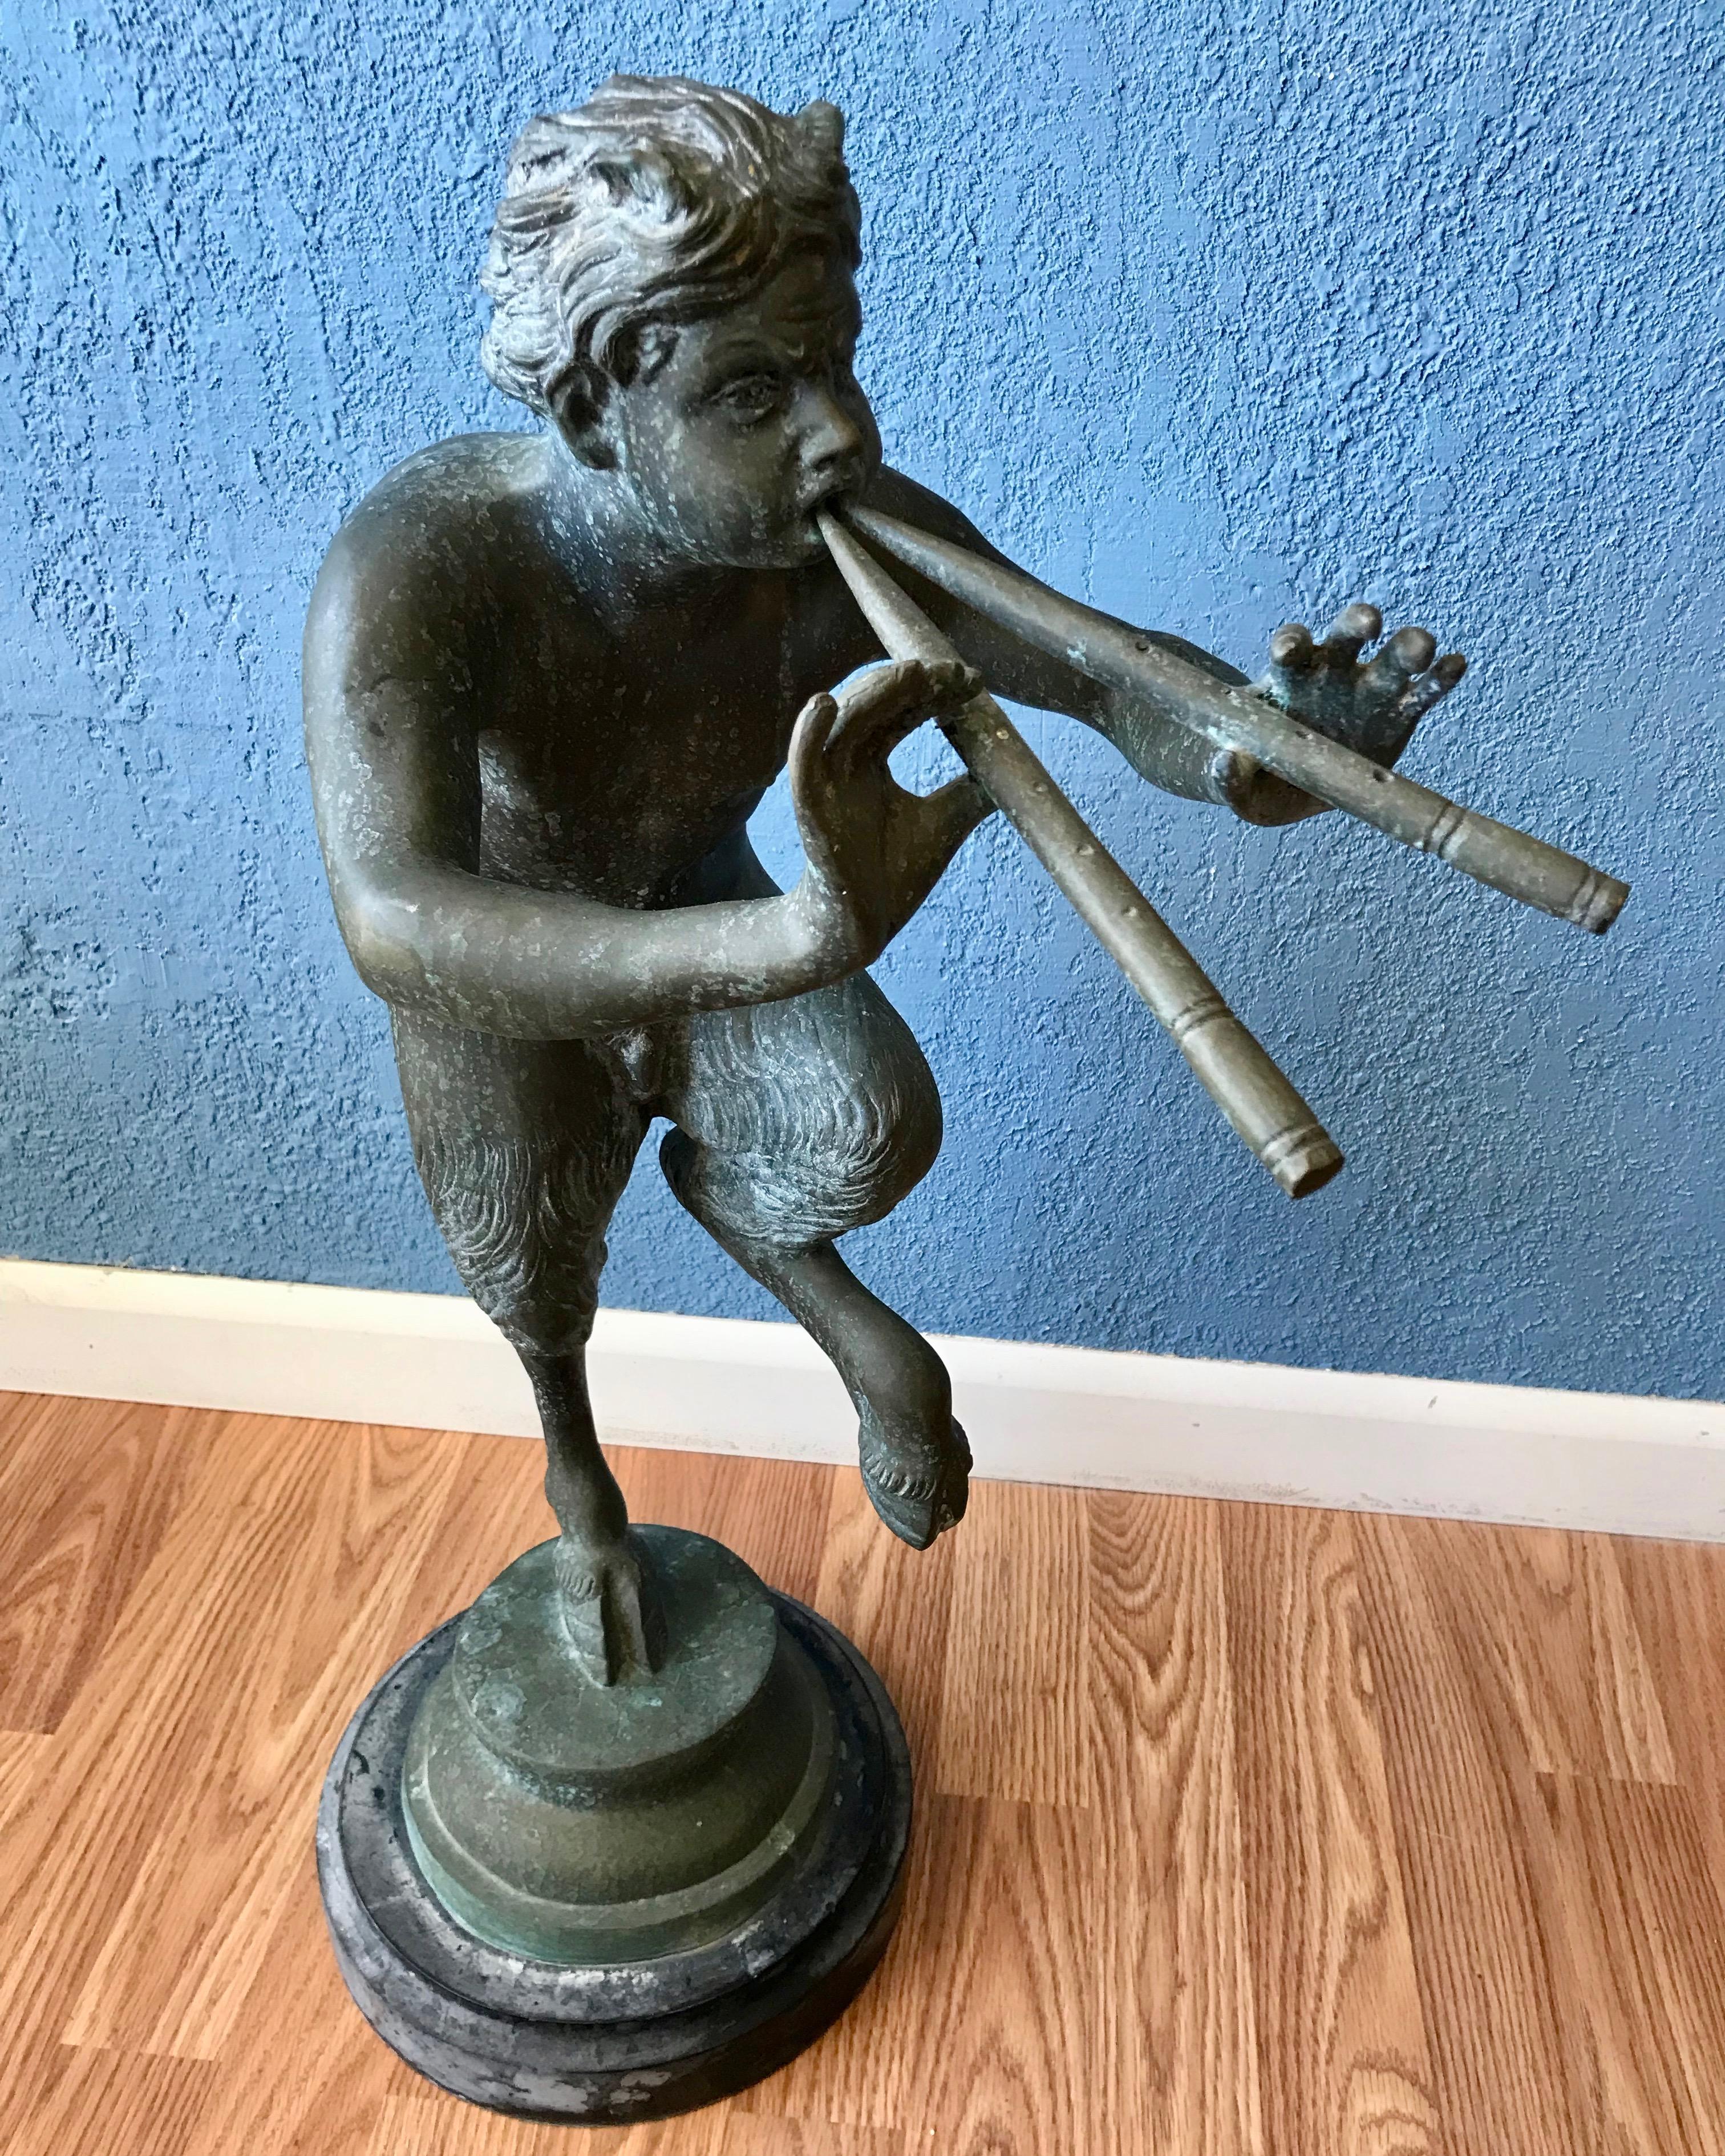 Impressive in scale with fine casting.
A verde gris patina from outside exposure. 
A classic pose with the figure playing the pipes.